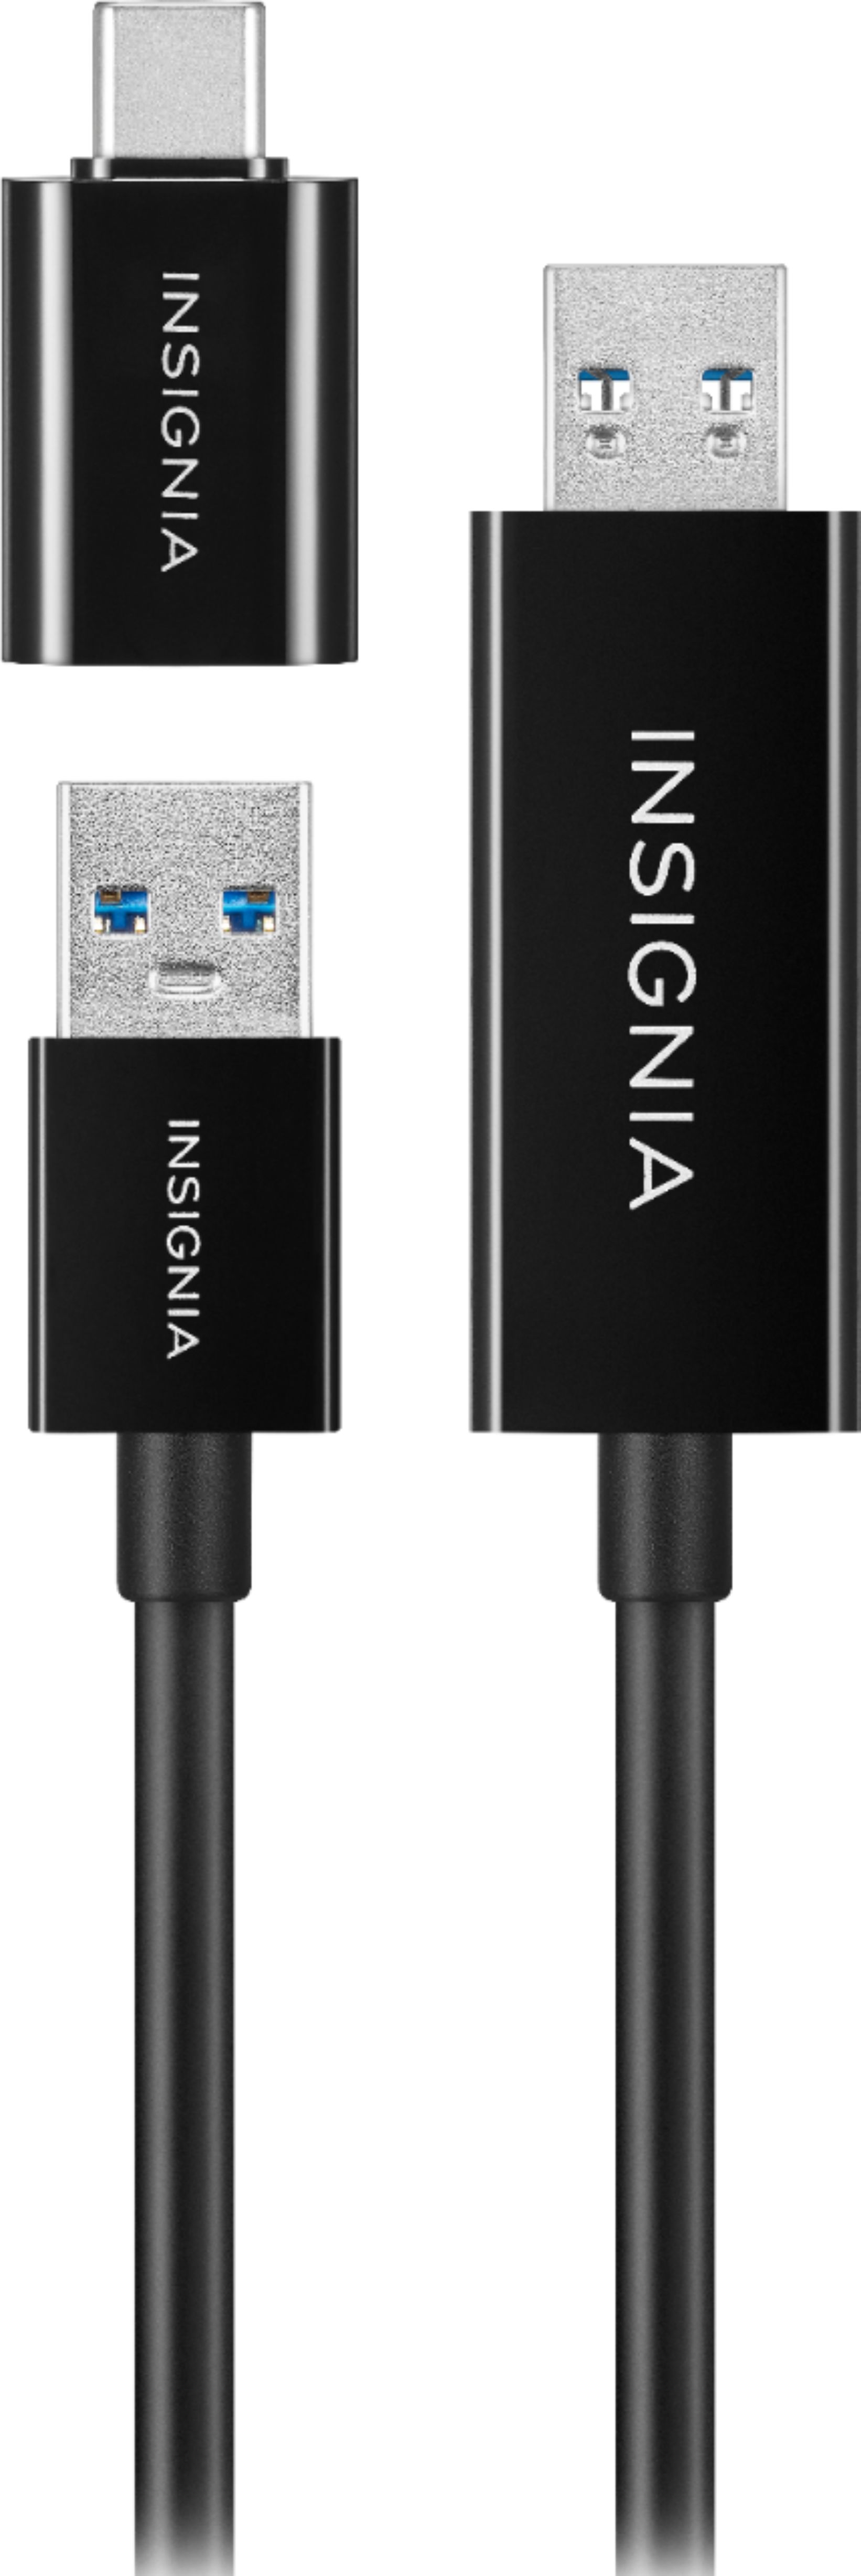 Insignia™ 10' USB to USB-B Cable Black NS-PC2A2B10 - Best Buy